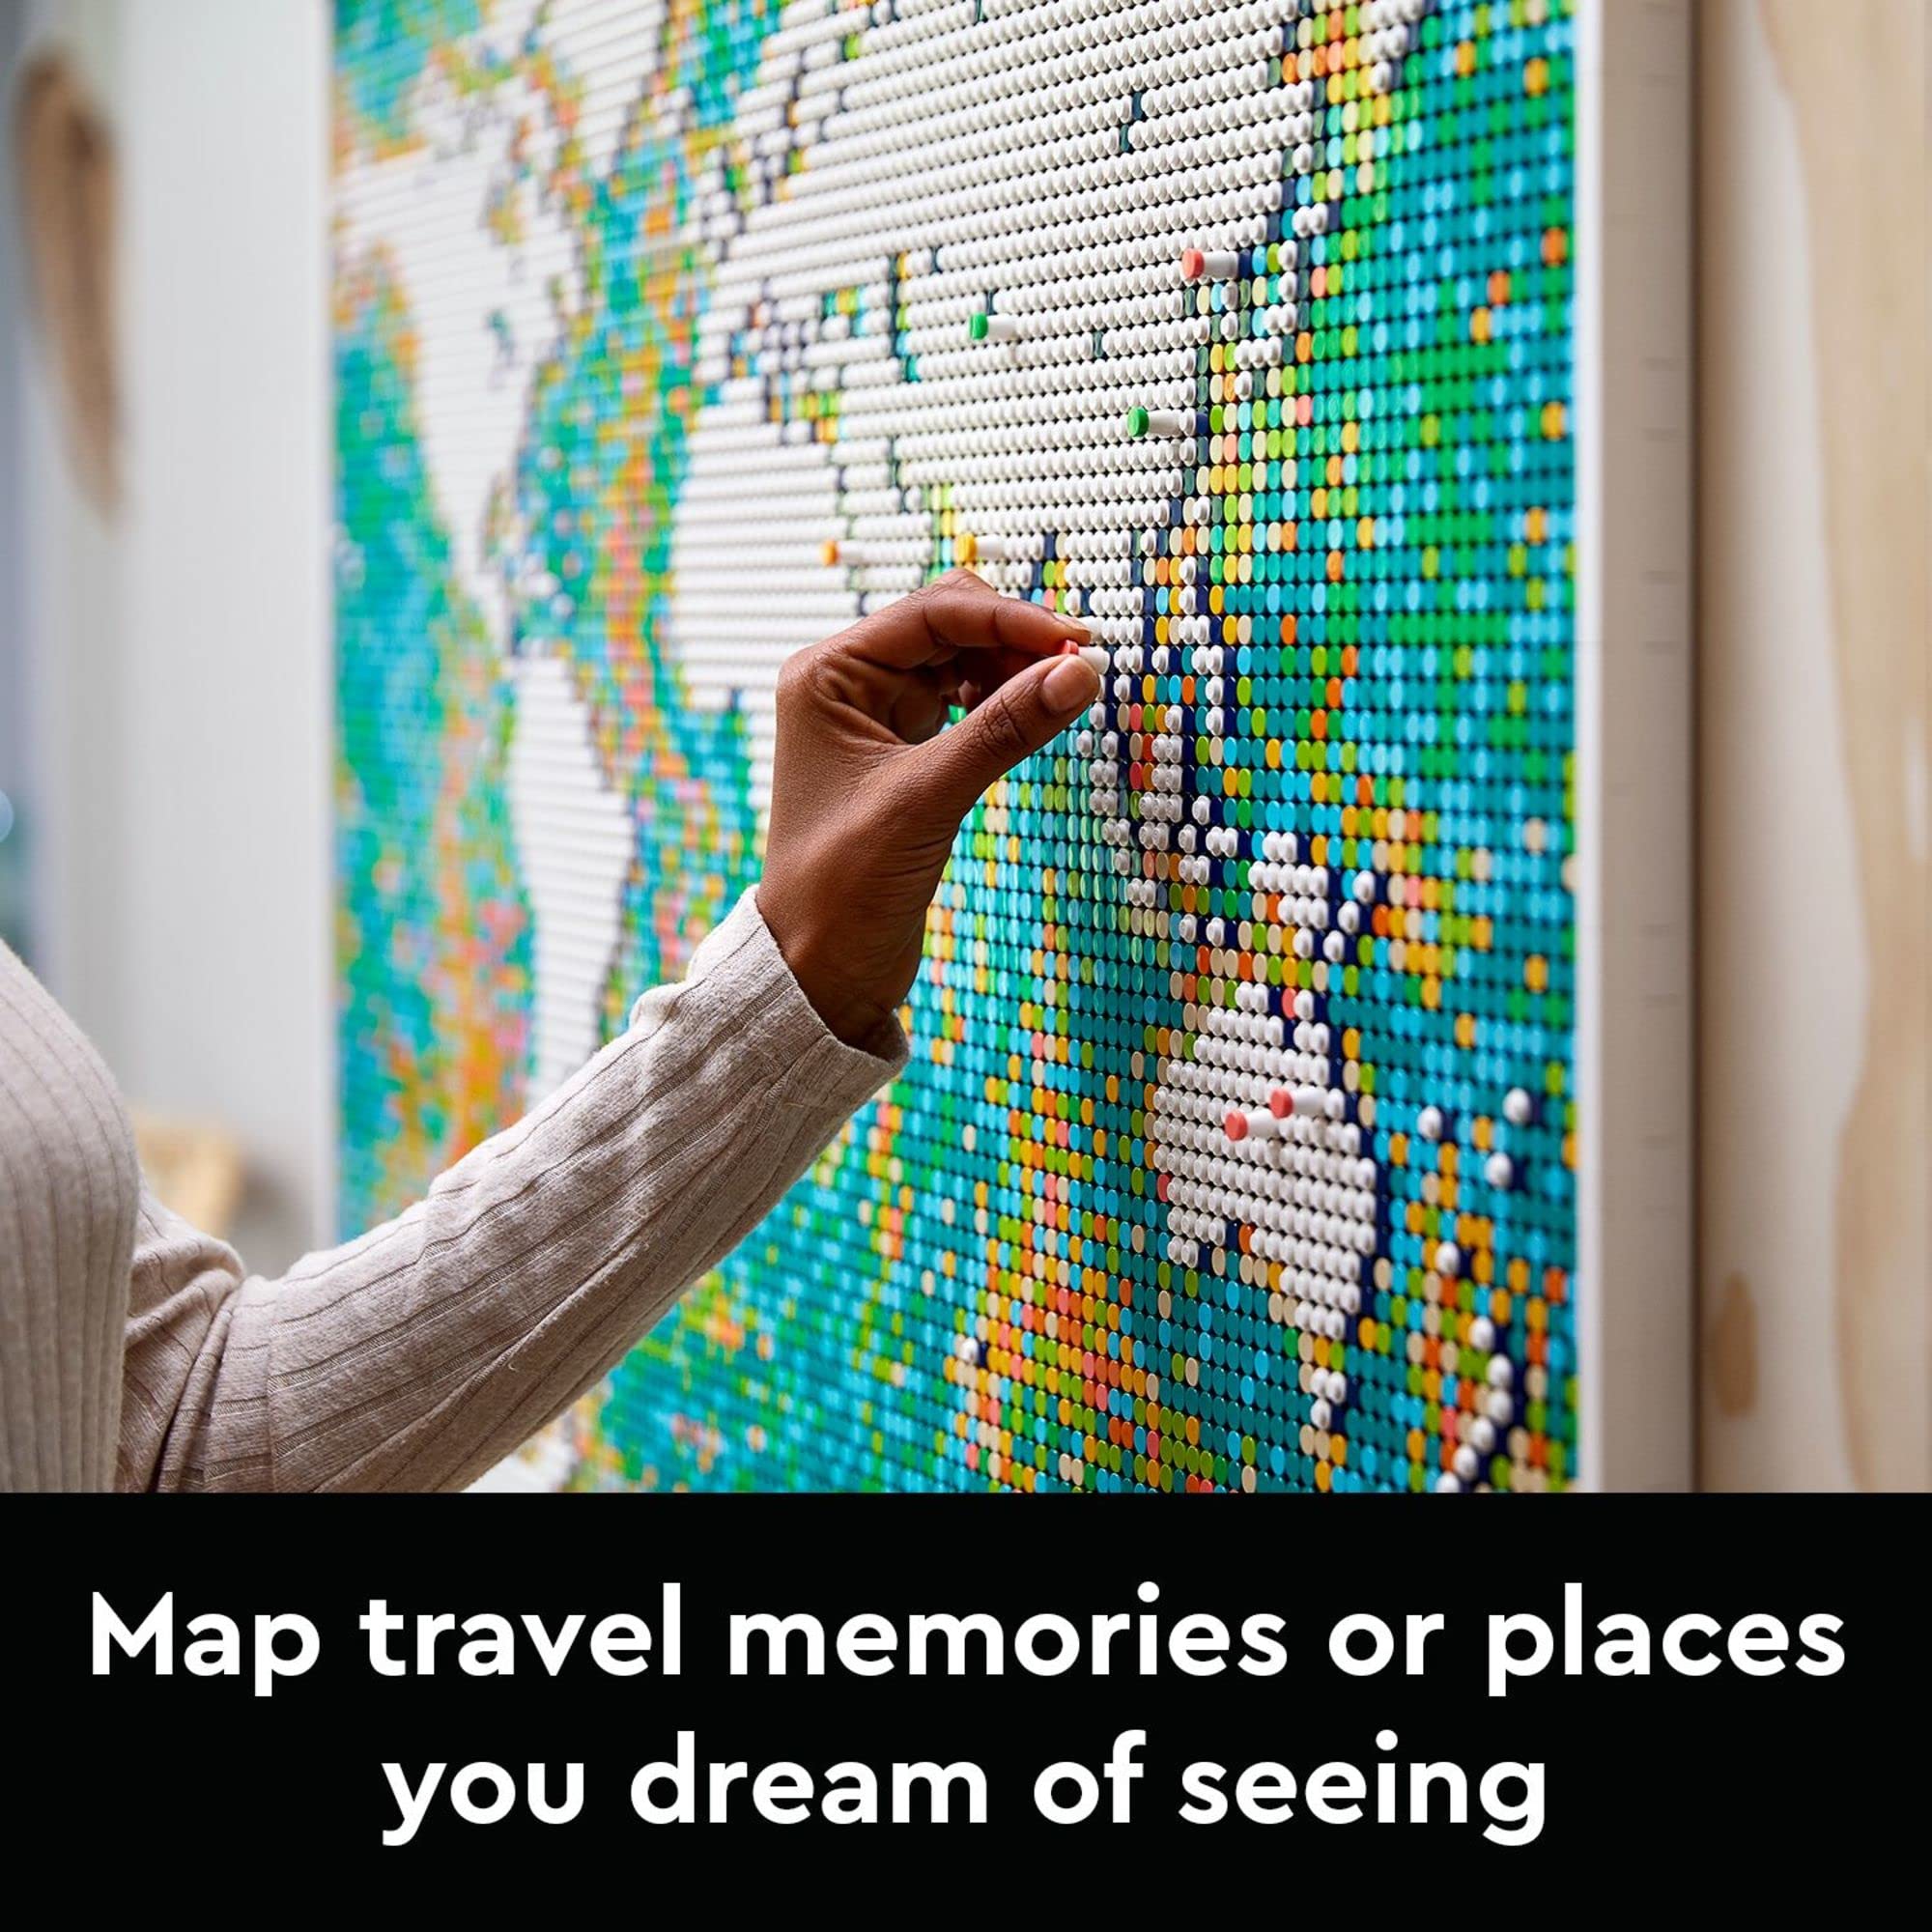 LEGO Art World Map 31203 Building Set - Collectibe Wall Art for Adults, Featuring Accompanying Soundtrack, Great Home Office Decor for Passionate Travelers, DIY Creators, and Map Enthusiasts